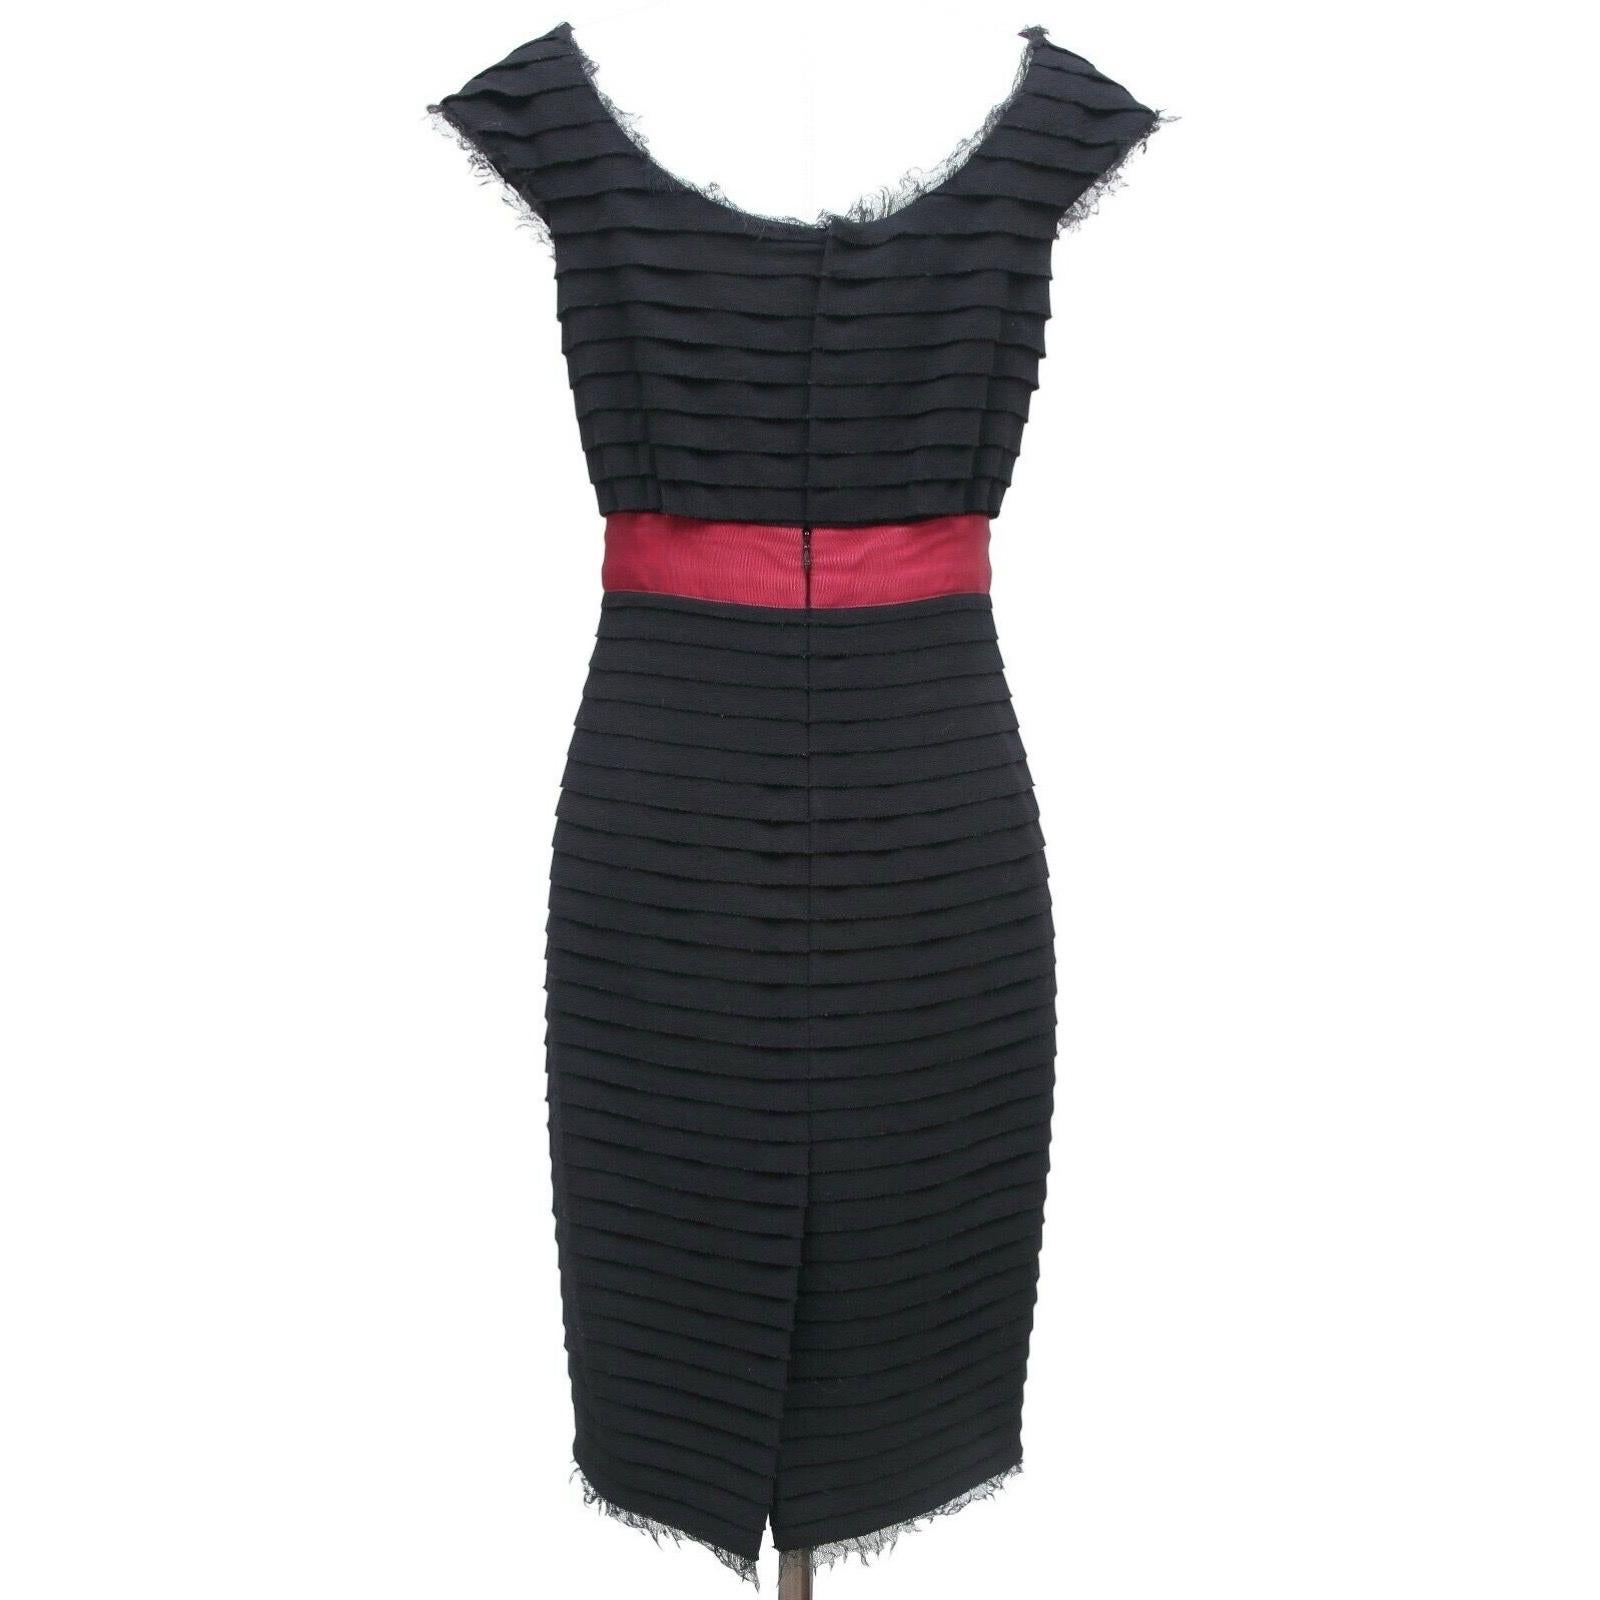 CHANEL Dress Cap Sleeve Black Cocktail Evening Tiered Bow Sheath Wool Sz 38 For Sale 1